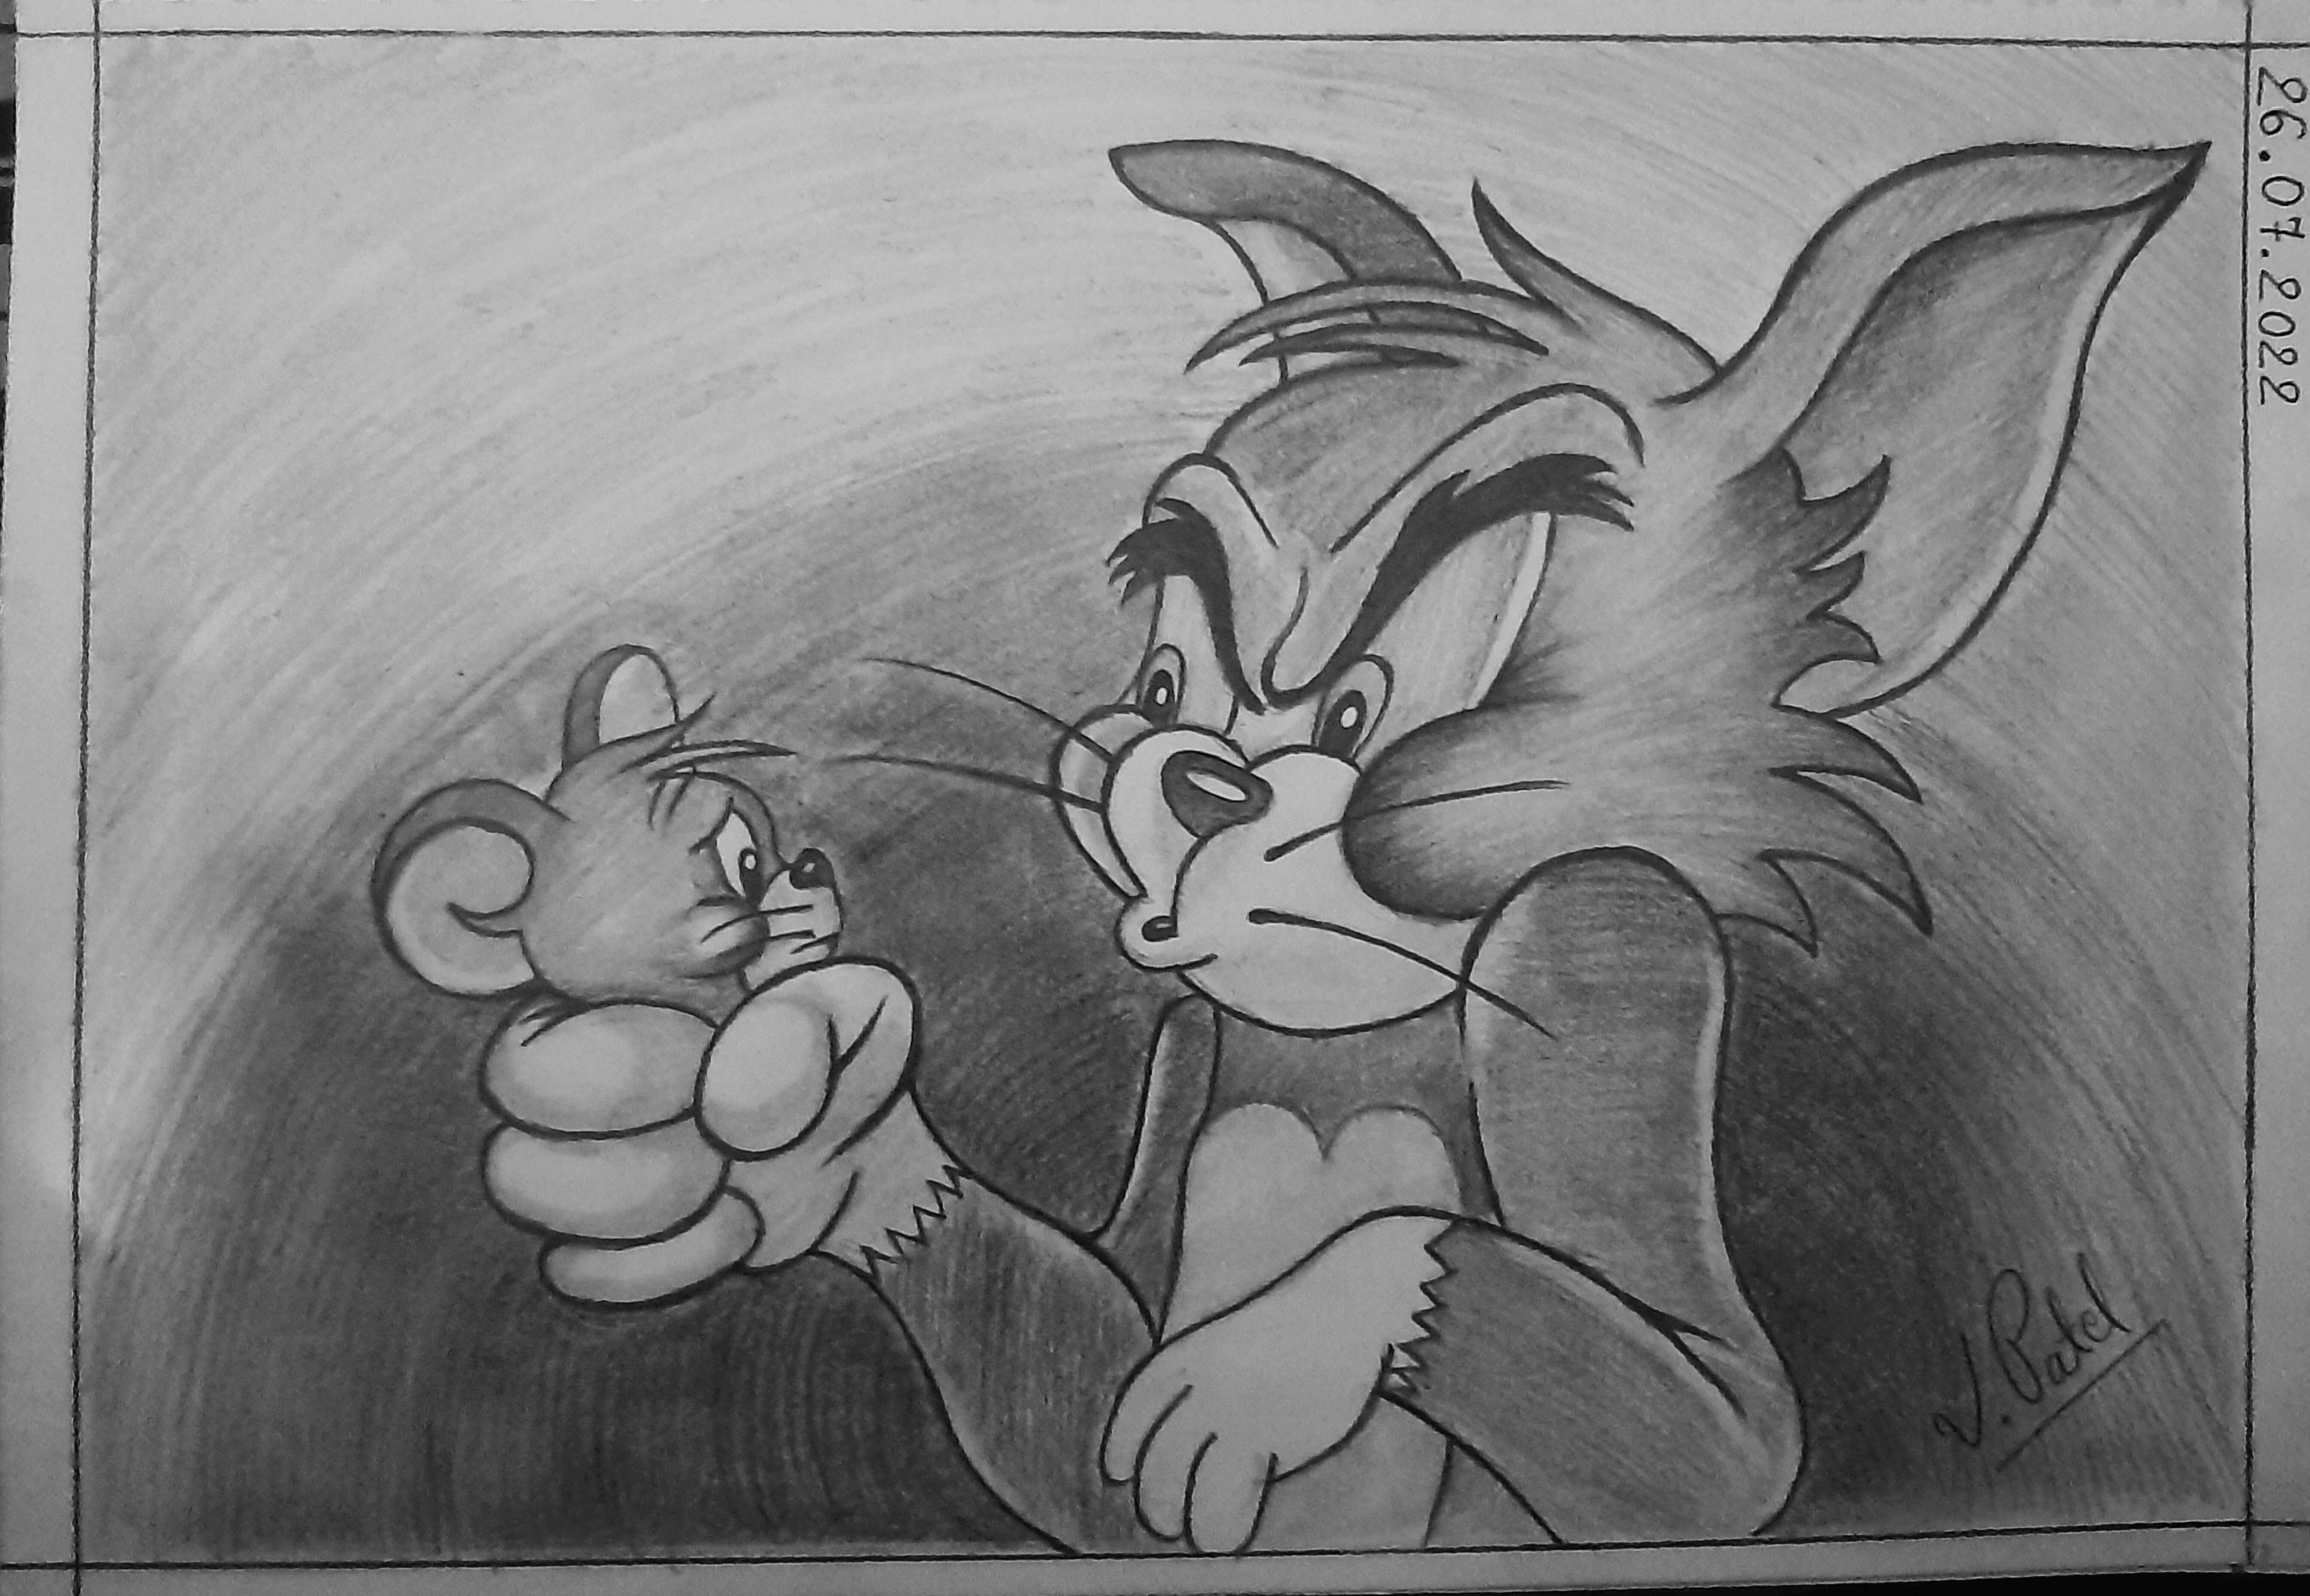 How to draw a sketch of Tom & Jerry - YouTube